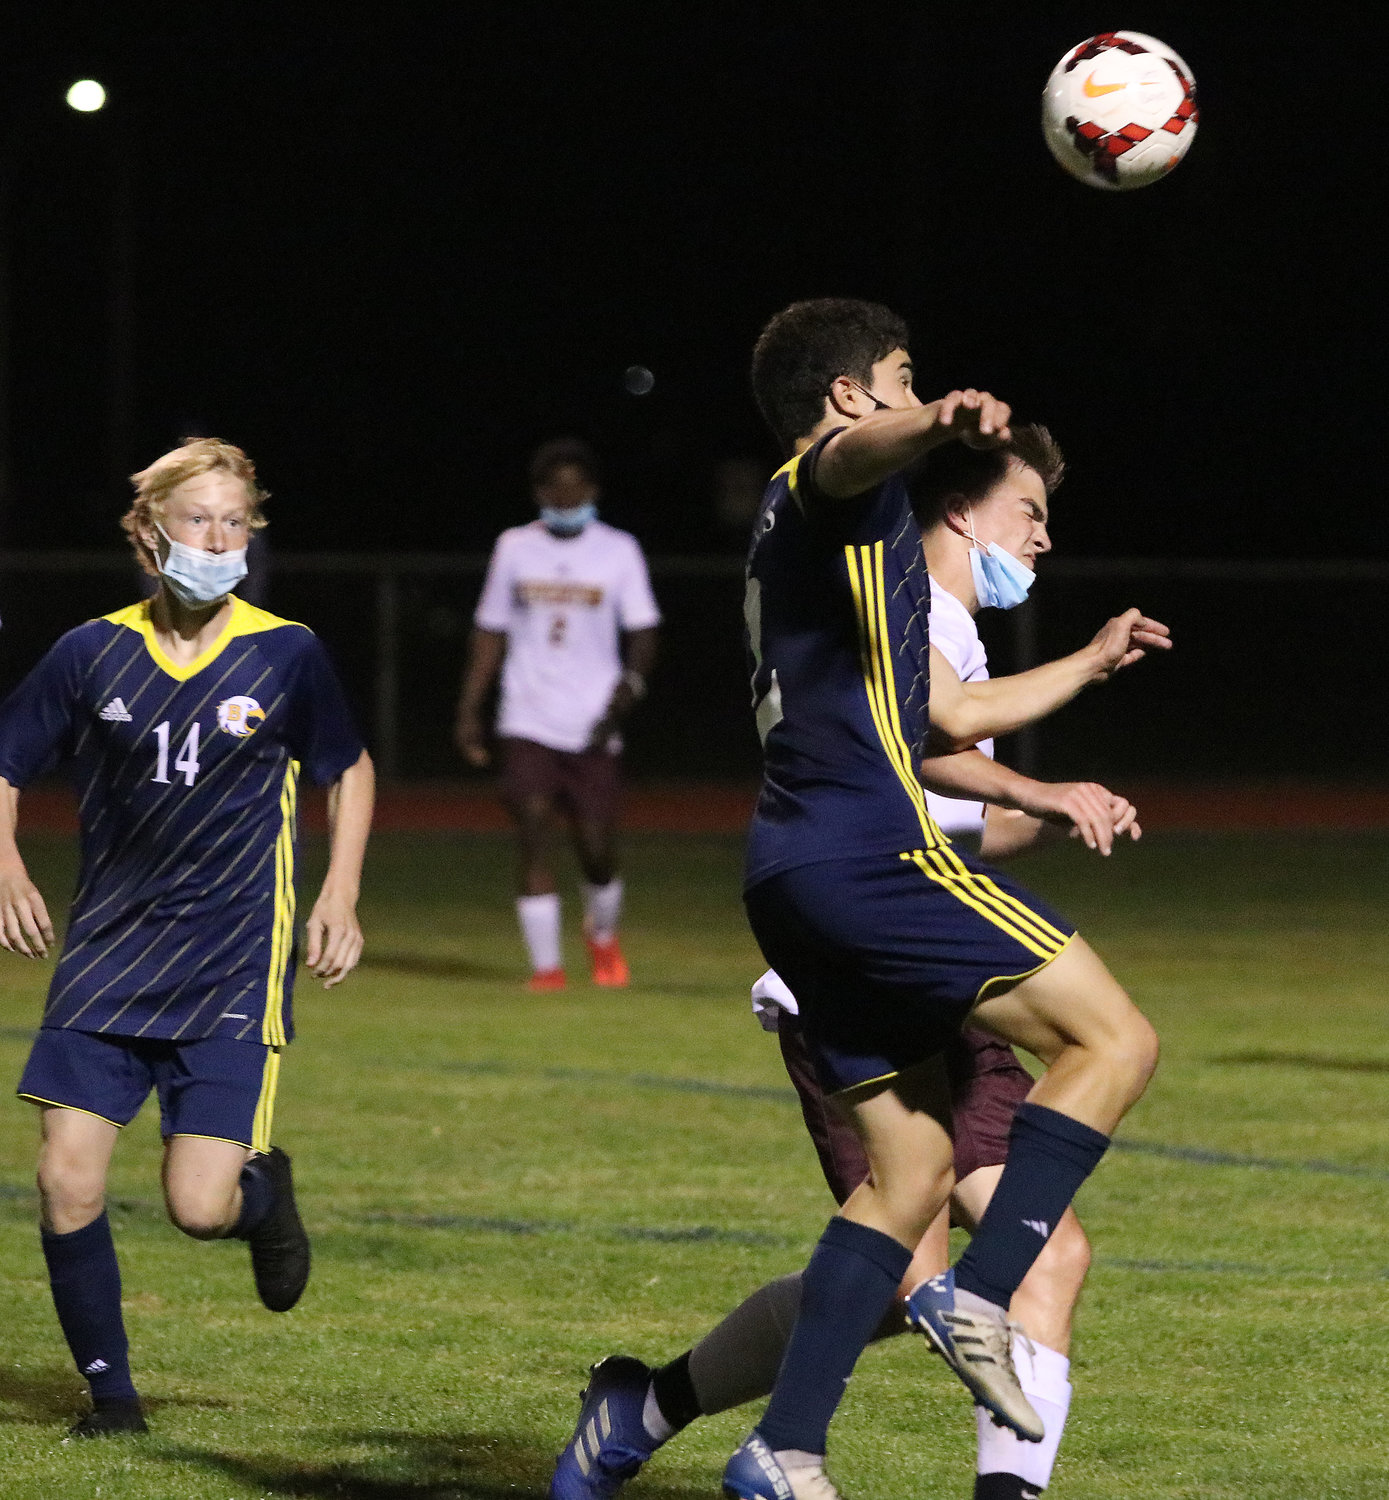 Barrington High School's Nico Arce elevates for a header while his teammate Leo Caldarella moves in, during the Eagles' game against Tiverton last week.